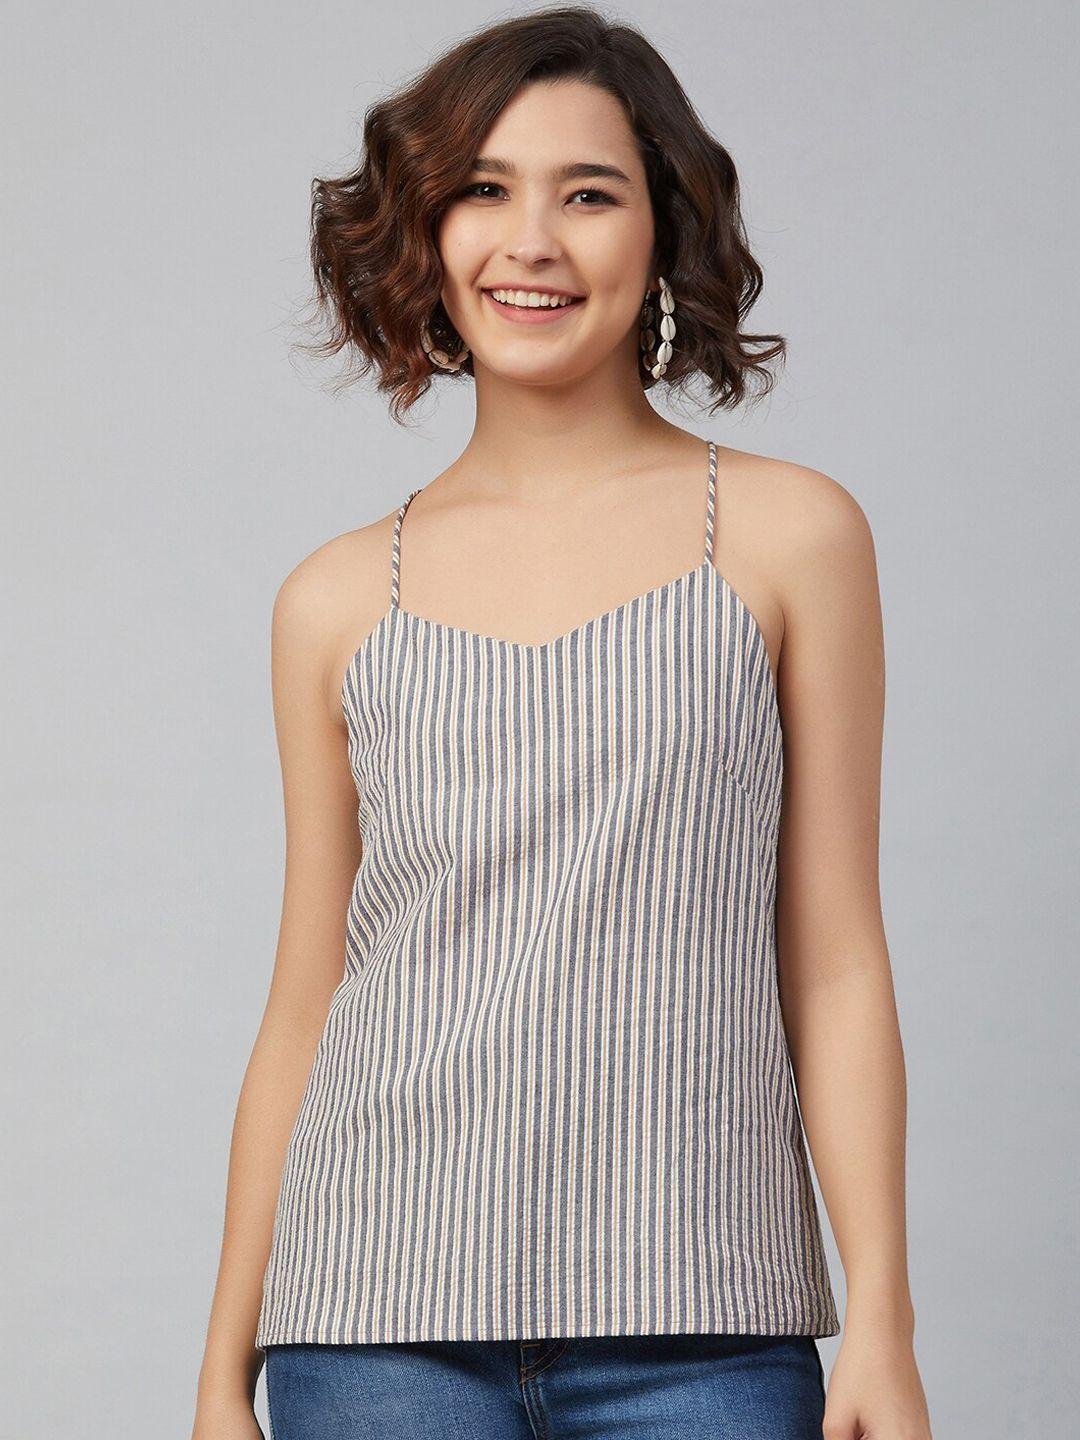 marie-claire-grey-striped-pure-cotton-regular-top